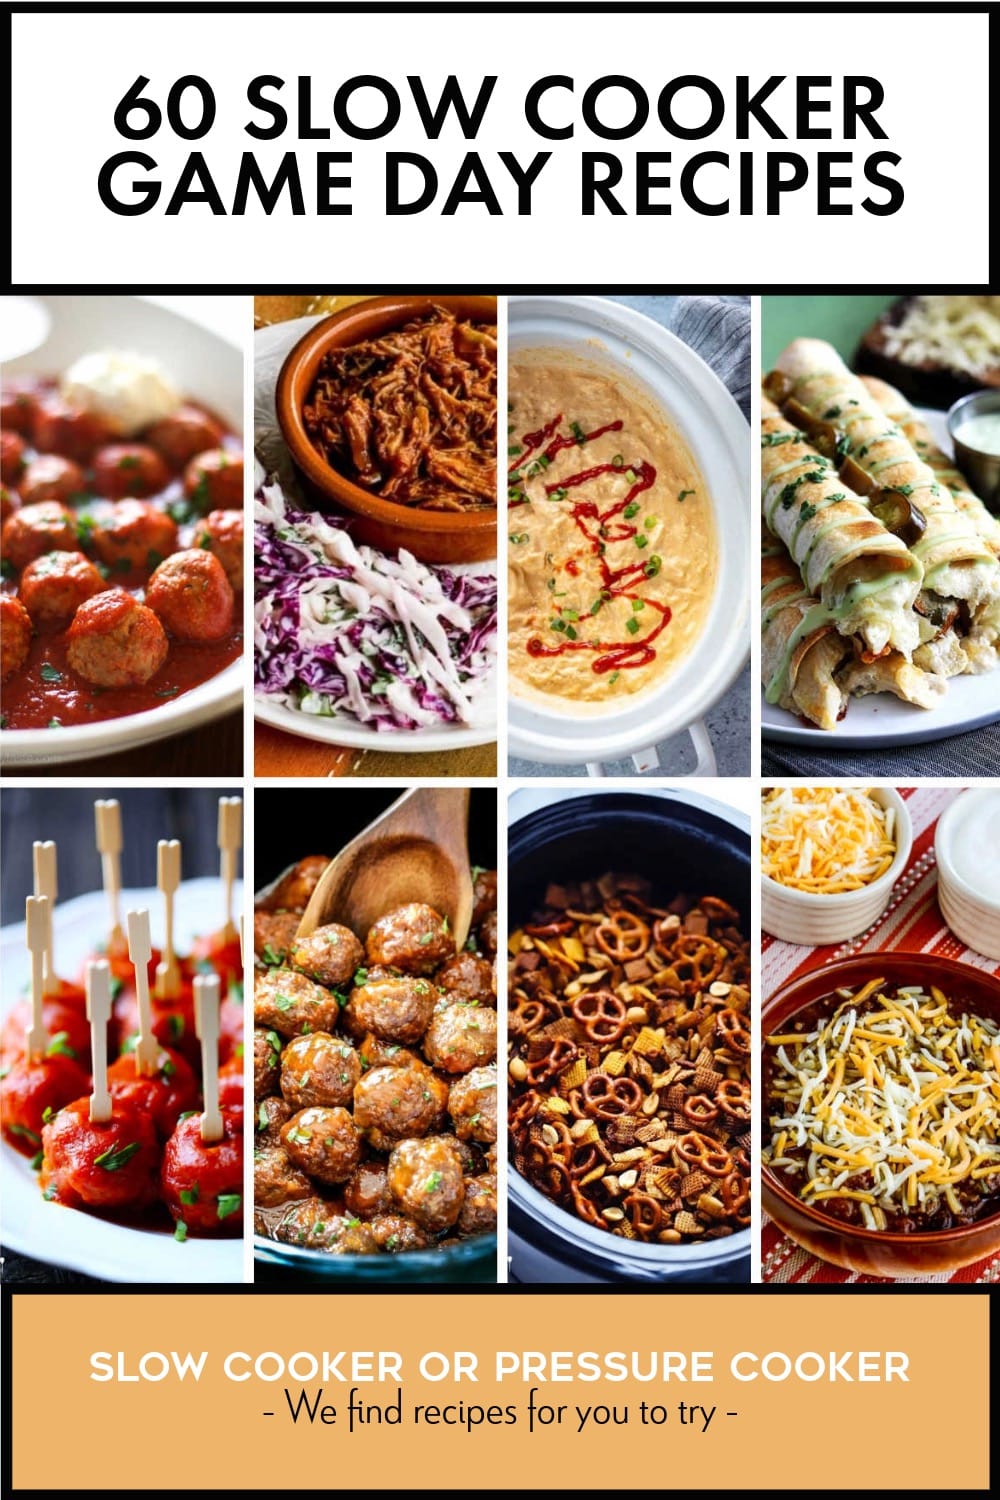 Pinterest image of 60 Slow Cooker Game Day Recipes